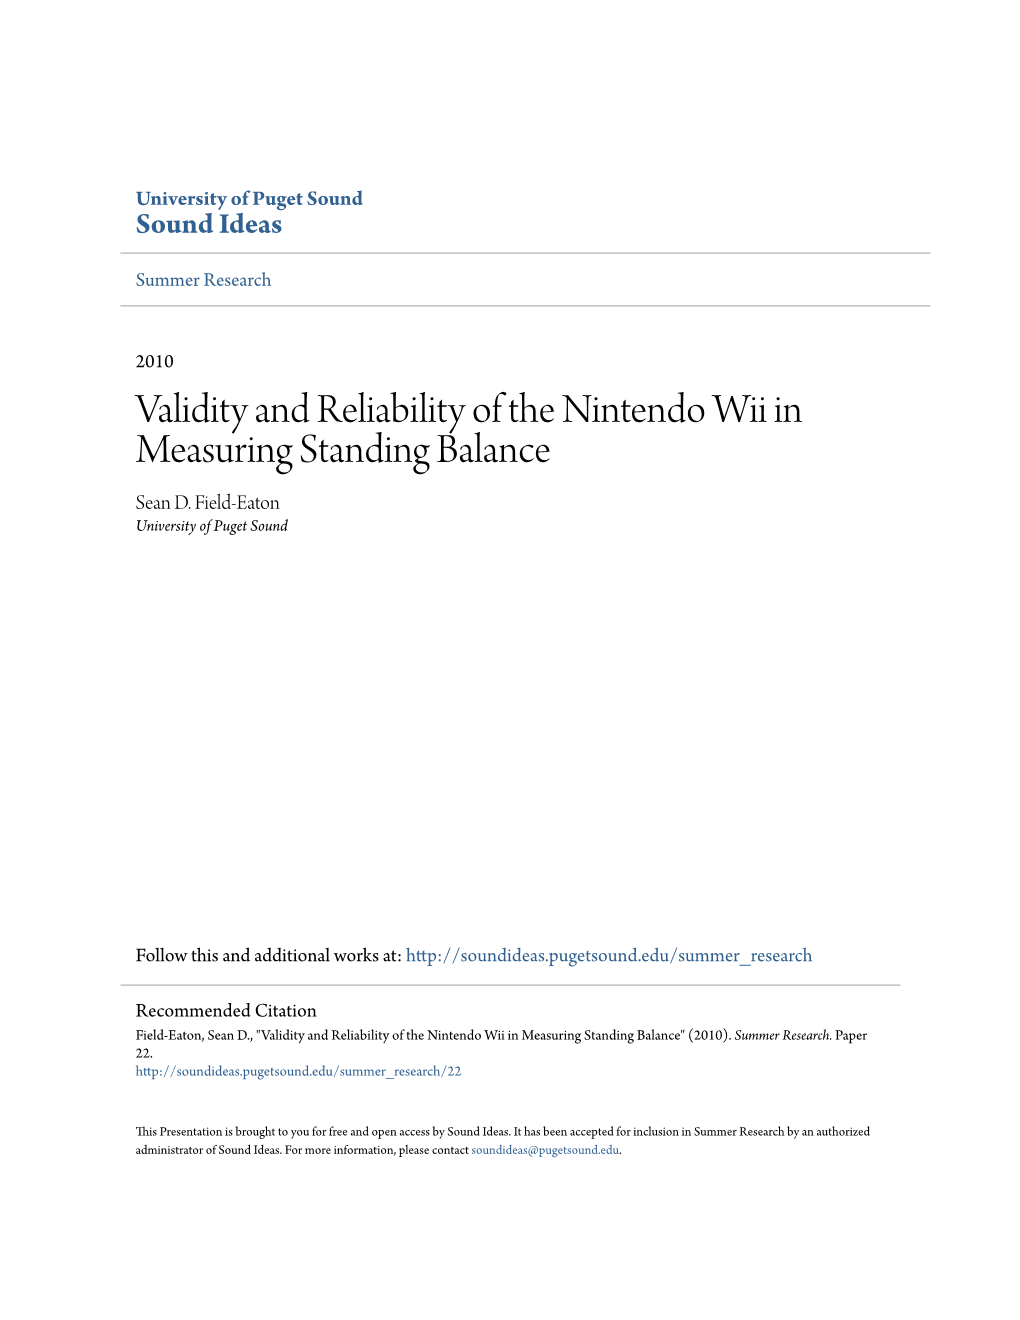 Validity and Reliability of the Nintendo Wii in Measuring Standing Balance Sean D